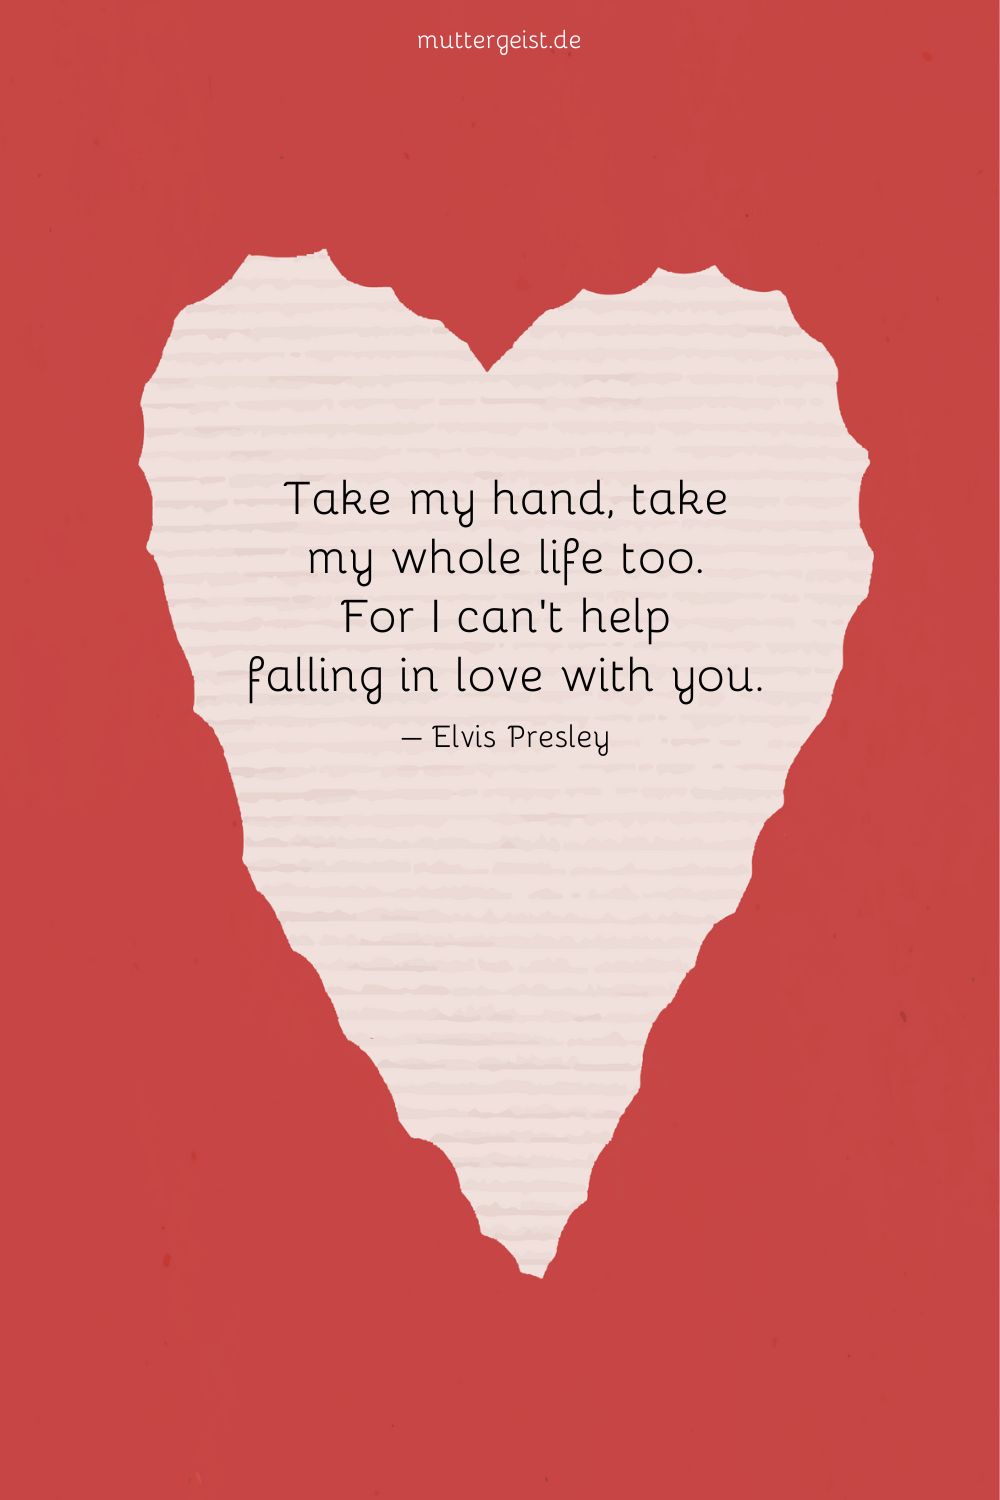 Take my hand, take my whole life too. For I can’t help falling in love with you